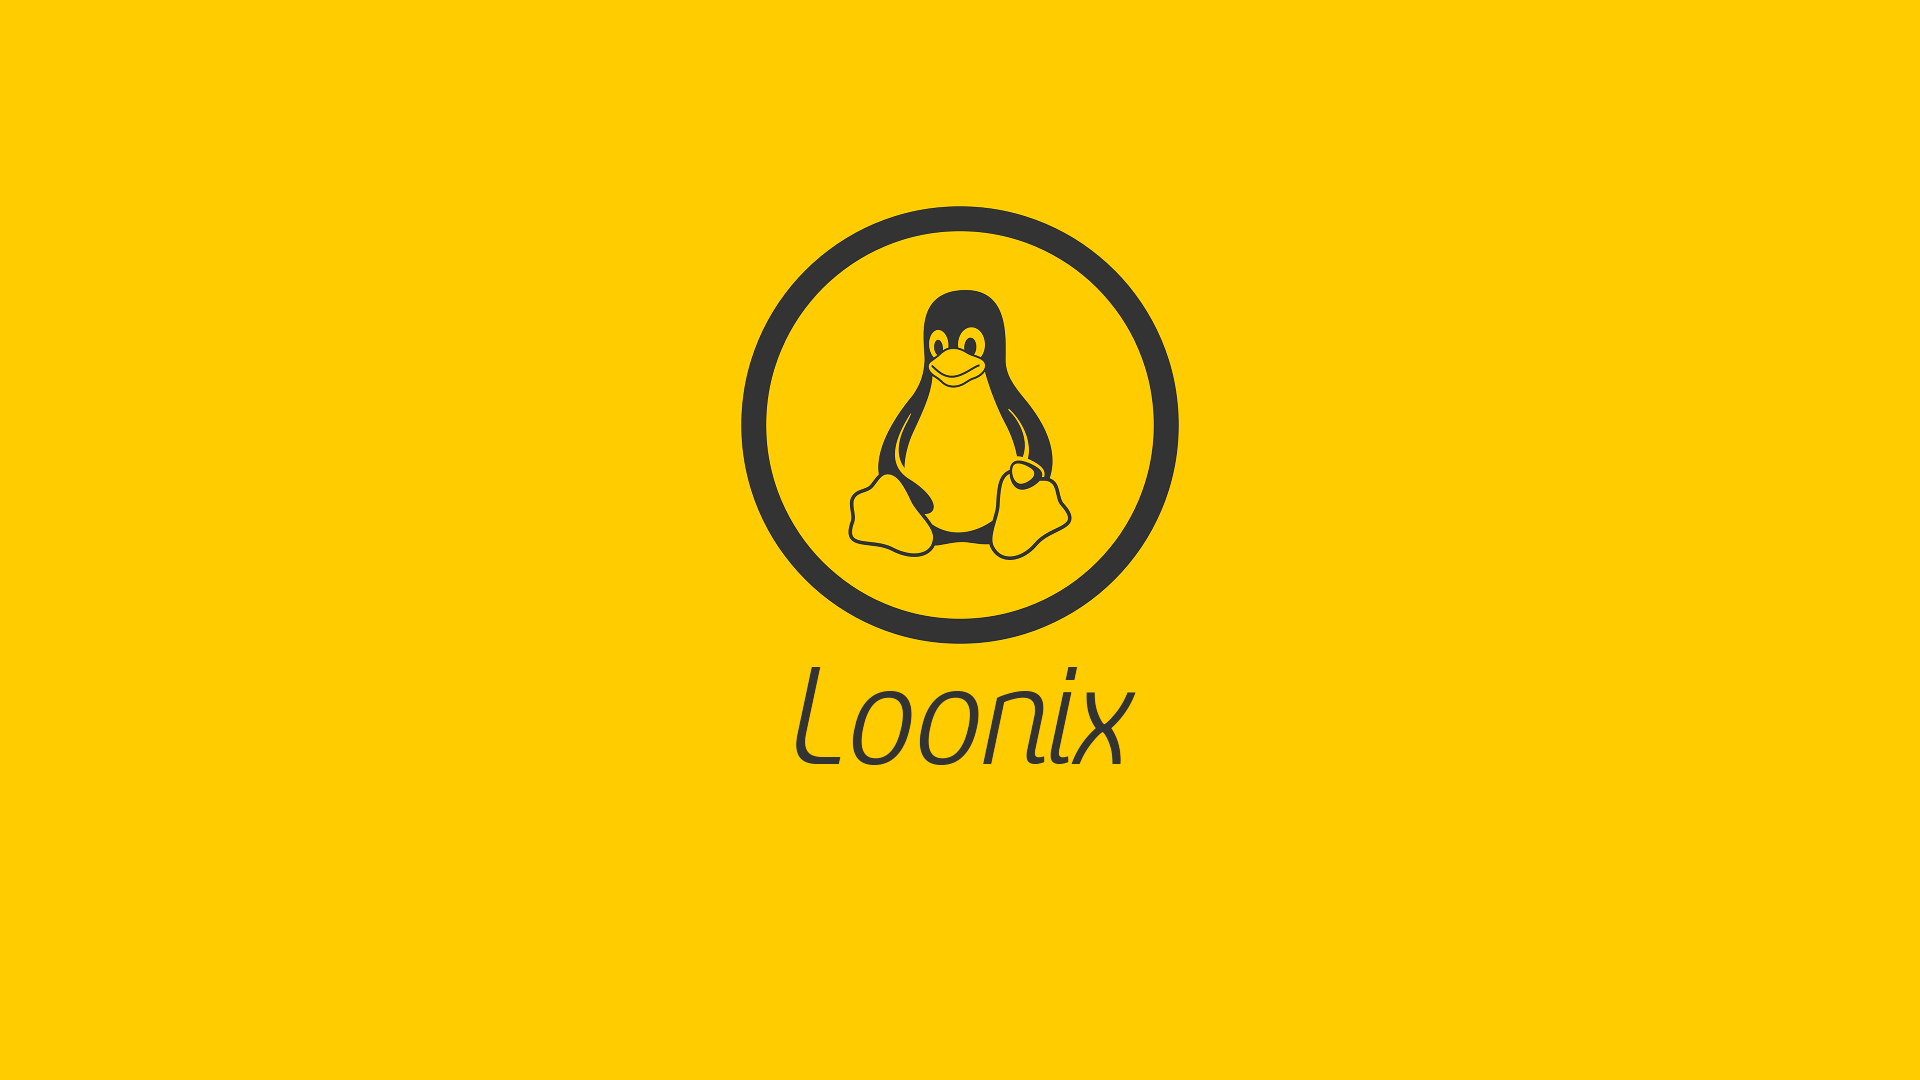 General 1920x1080 Linux Tux yellow background penguins operating system